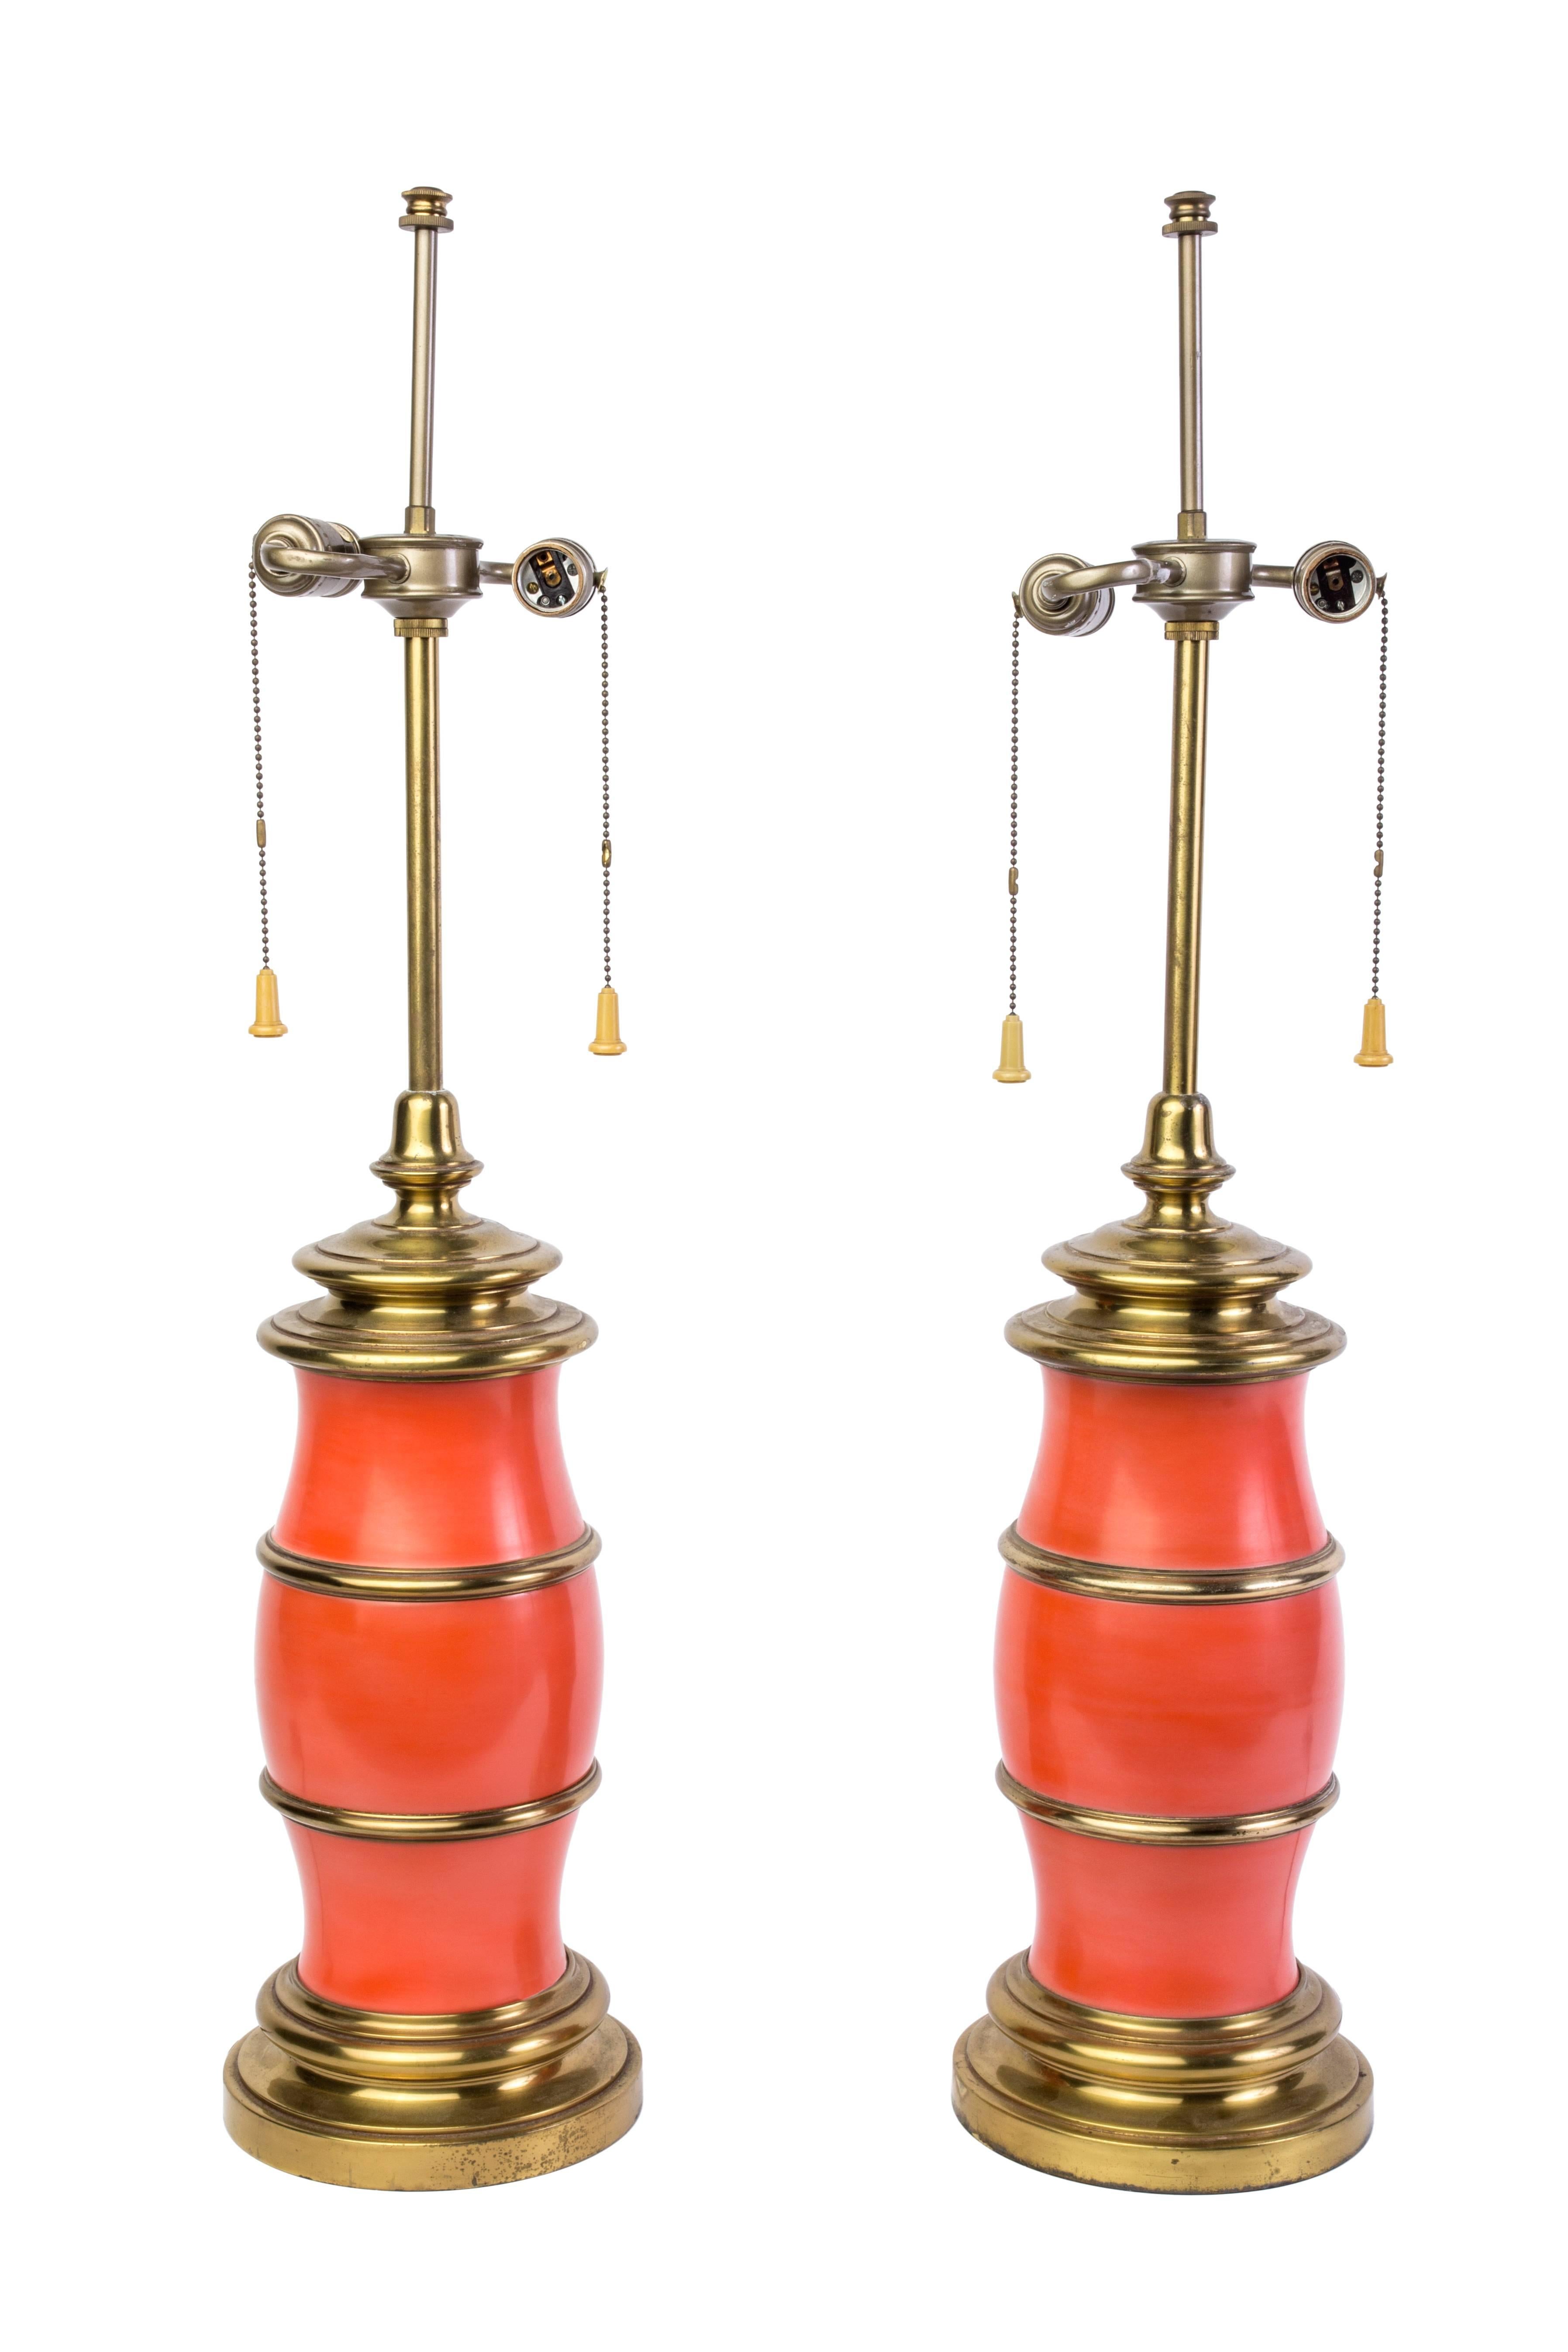 Pair of Mid-Century modernist lamps by Stiffel. They feature a ceramic centre in salmon color and brass frame. 

Made in America, circa 1960

Measures: 34 1/2